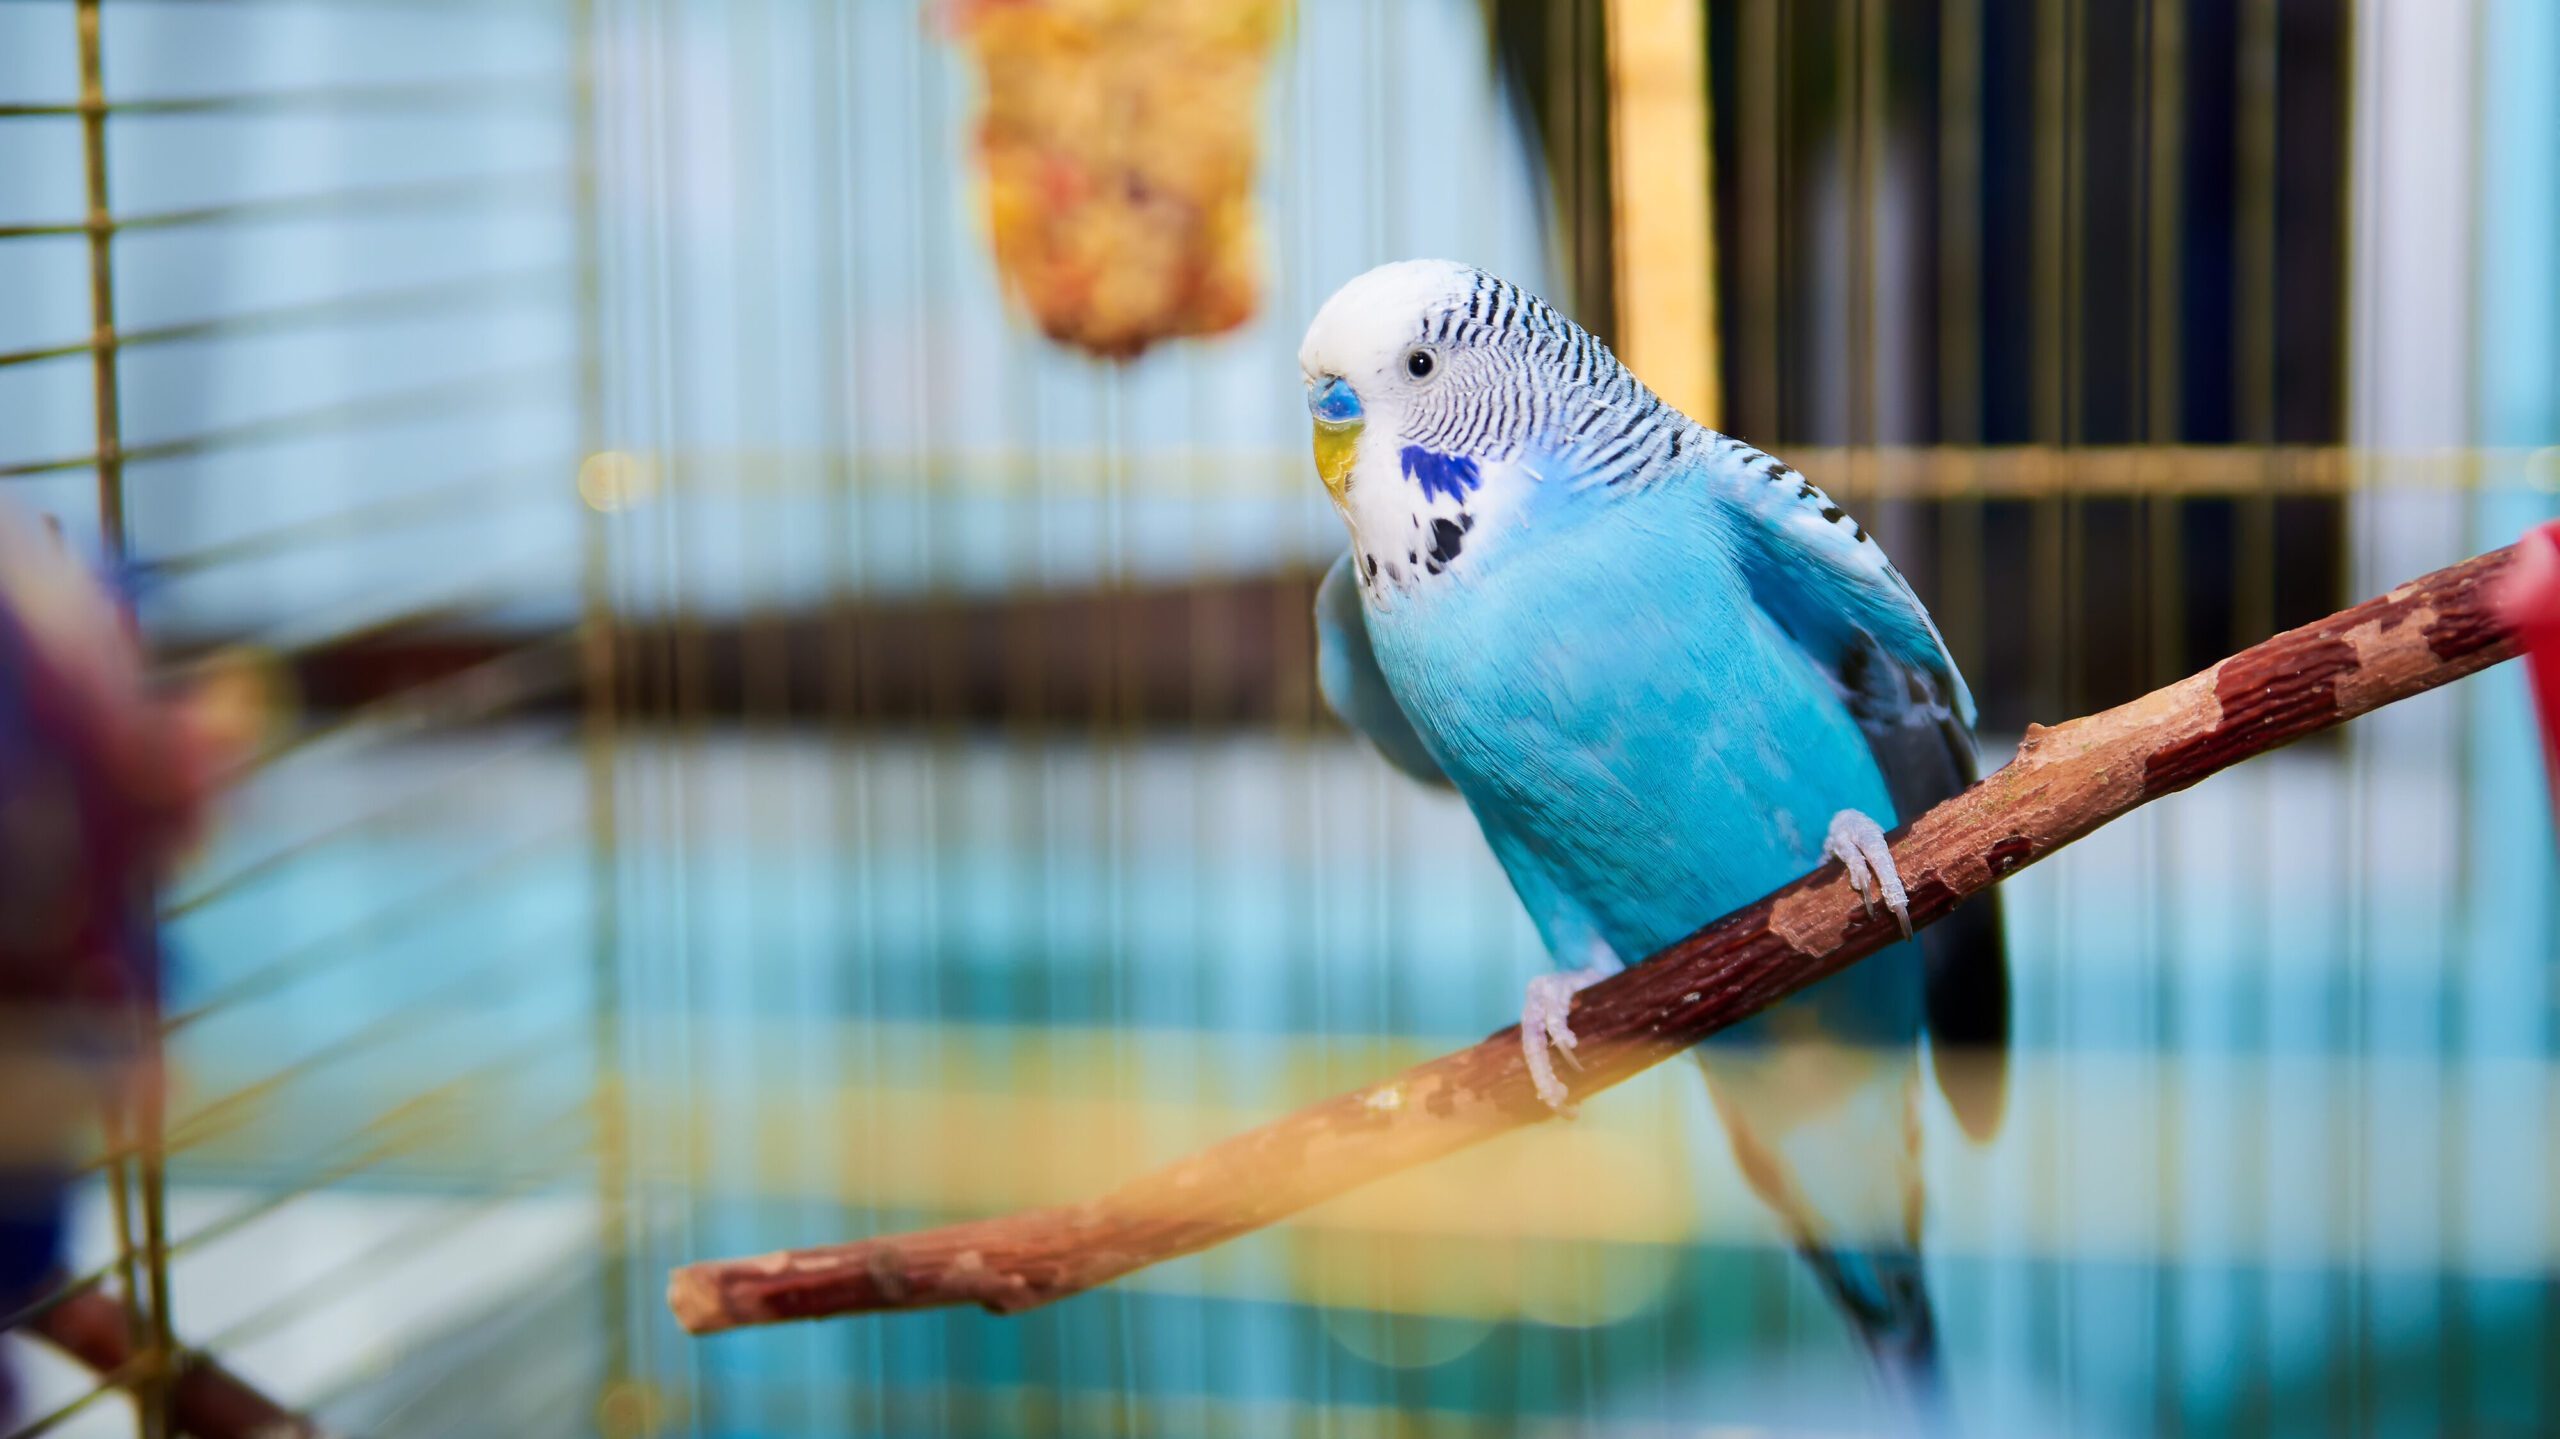 When it comes to choosing a pet bird, one important decision to make is whether to bring home a single bird or opt for a larger flock.